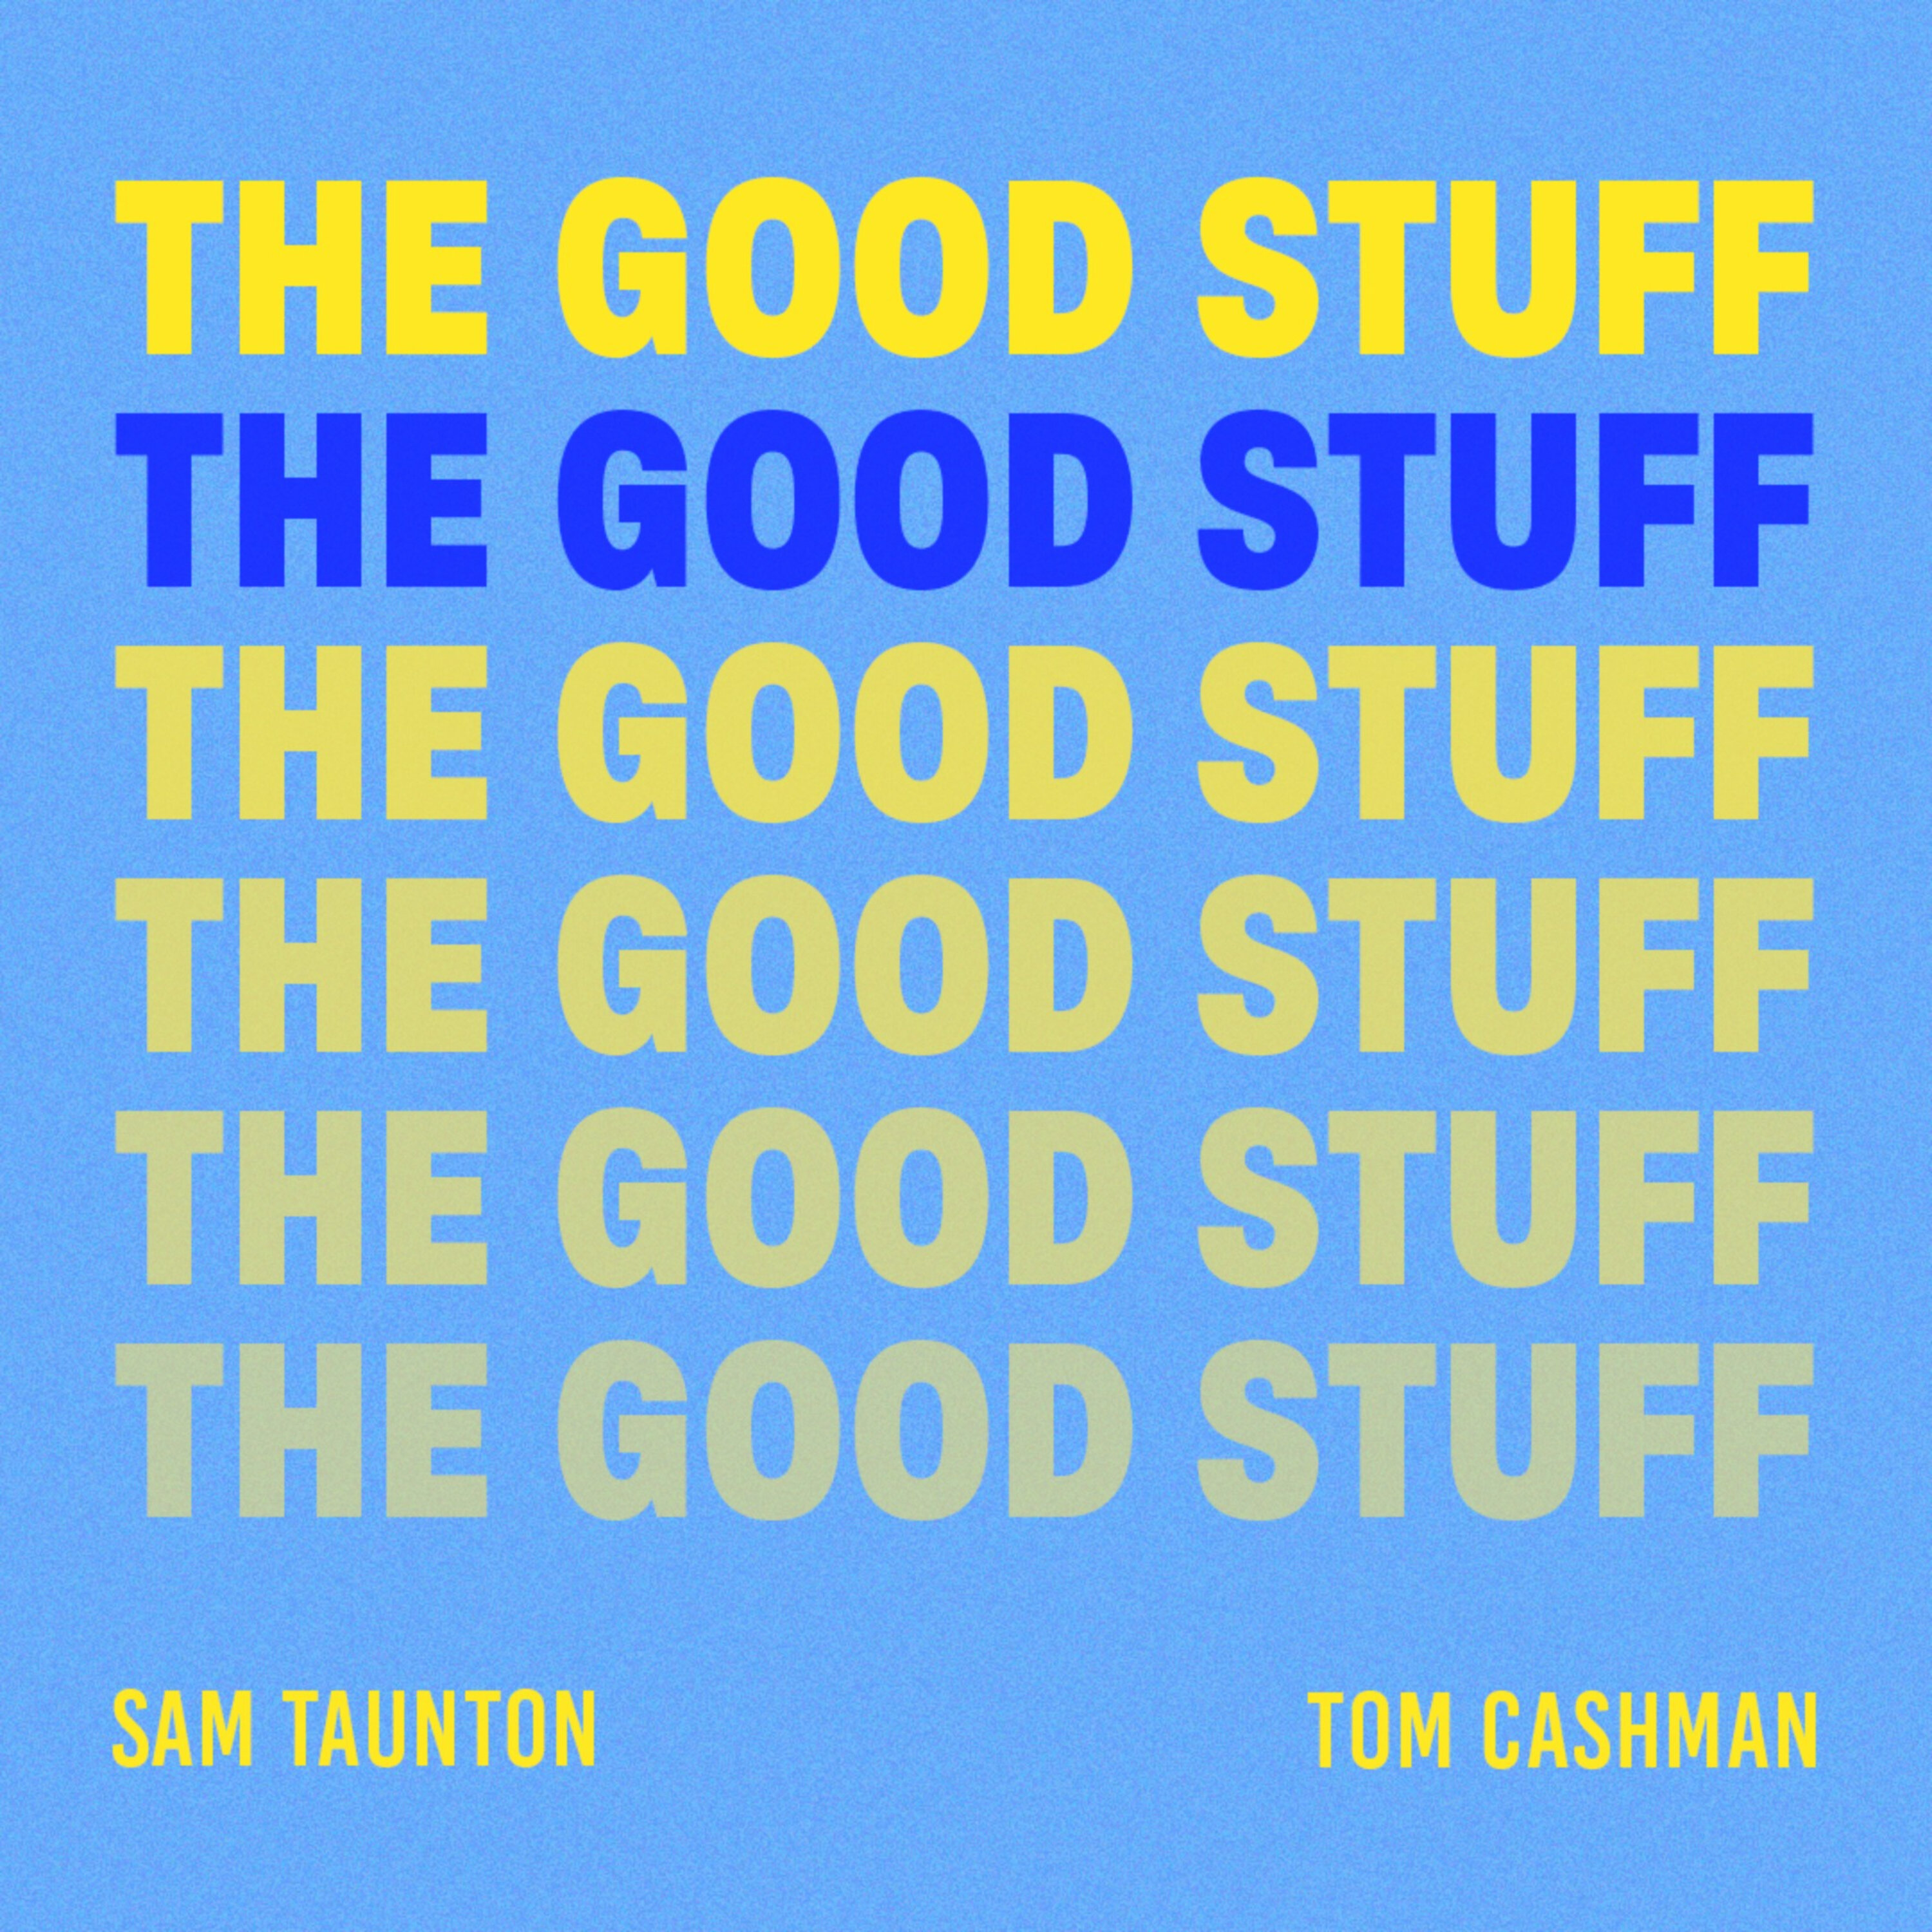 The Good Stuff - Episode 62 - Landlord References and Elder Sexuality